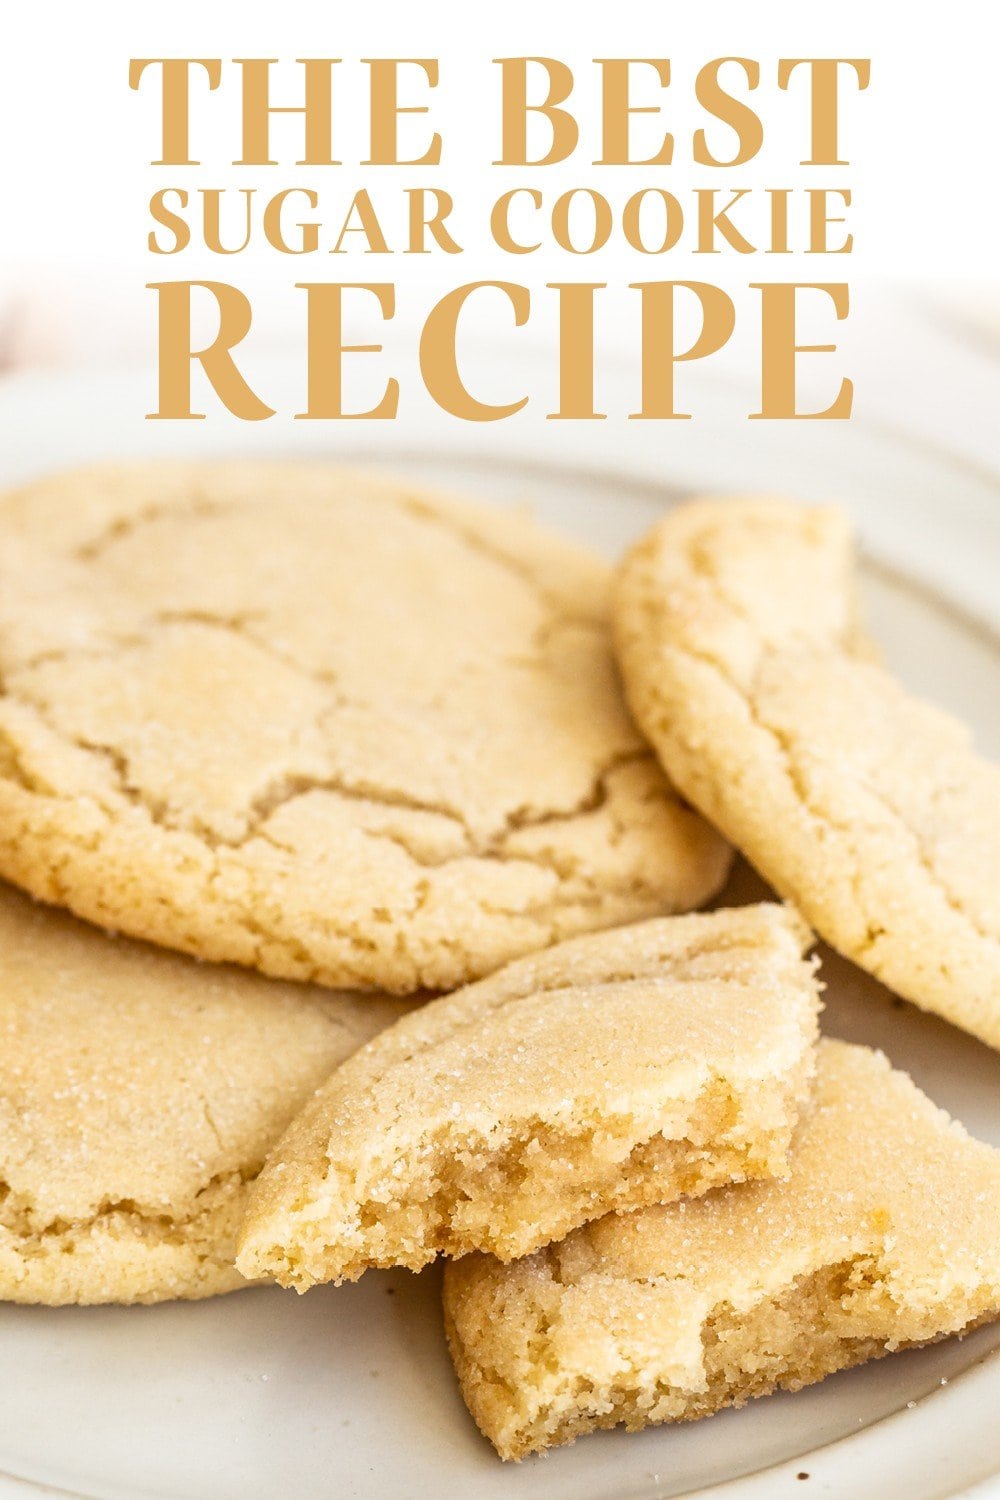 BEST Sugar Cookie Recipe | Soft, Chewy Drop-Style Cookies